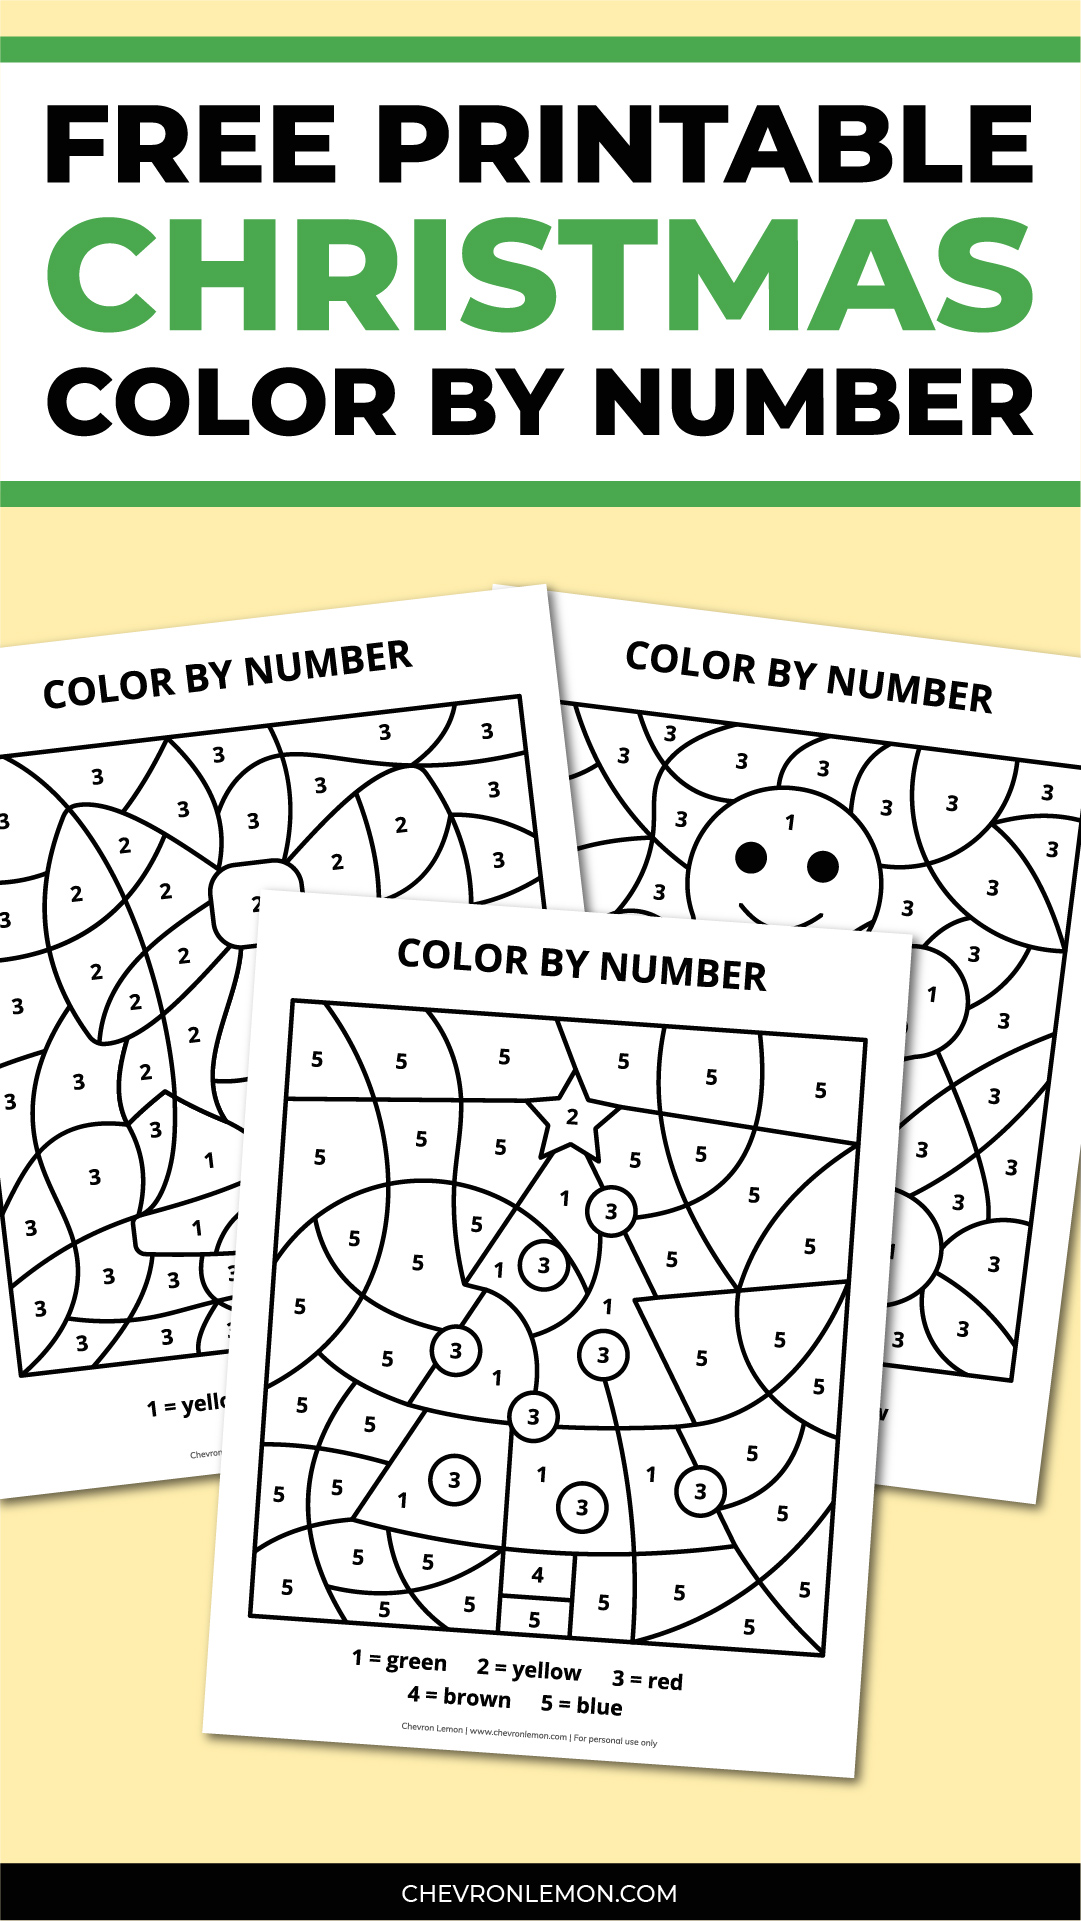 Printable Christmas color by number pages - Chevron Lemon